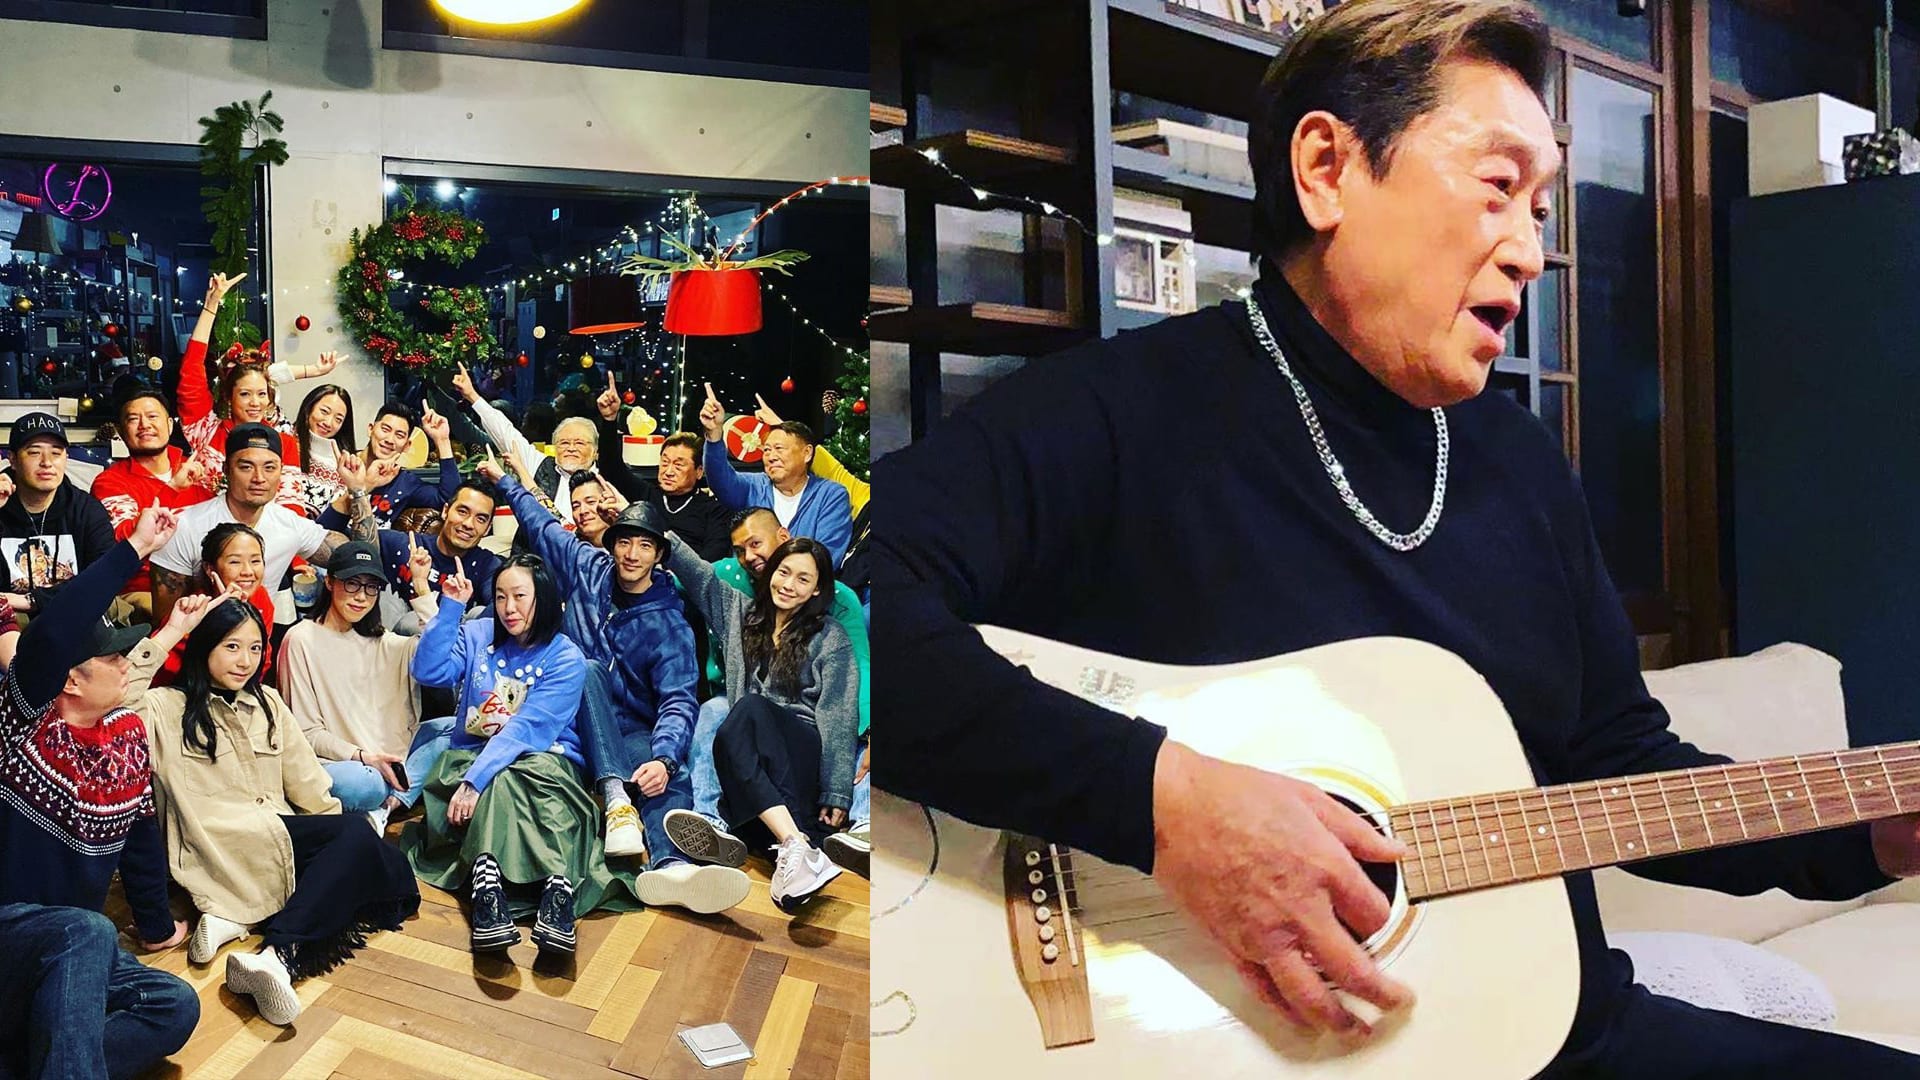 Wang Leehom, Christine Fan & Wilber Pan Celebrated Christmas Early With Godfrey Gao’s Dad